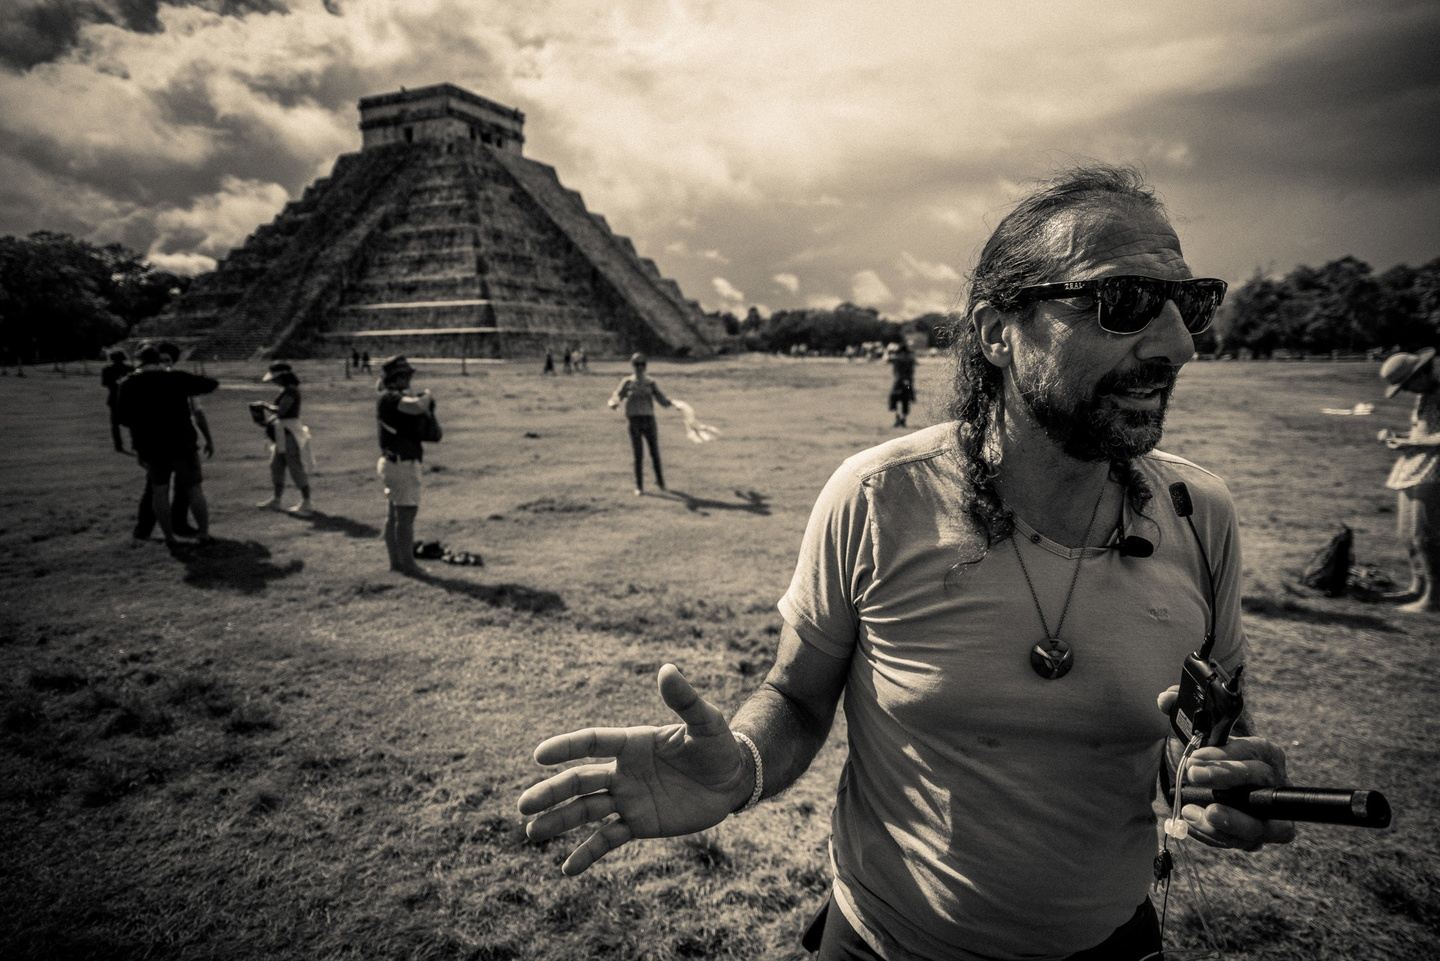 Singularity Conference & Adventure with Nassim Haramein